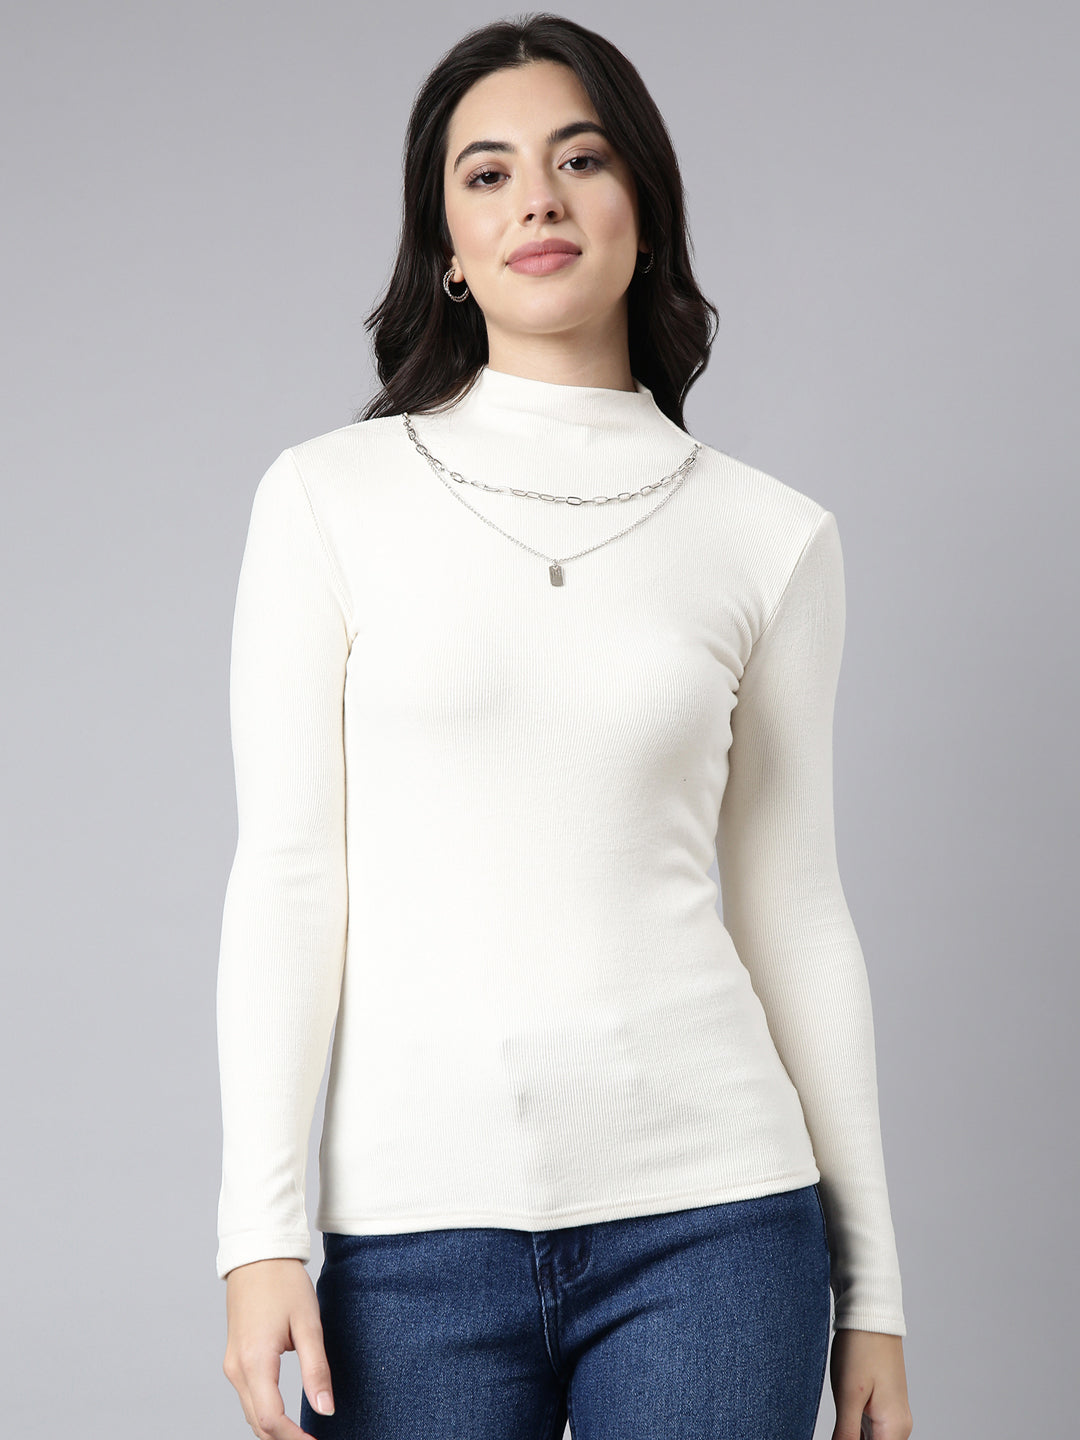 Women Solid Cream Top Comes With Chain